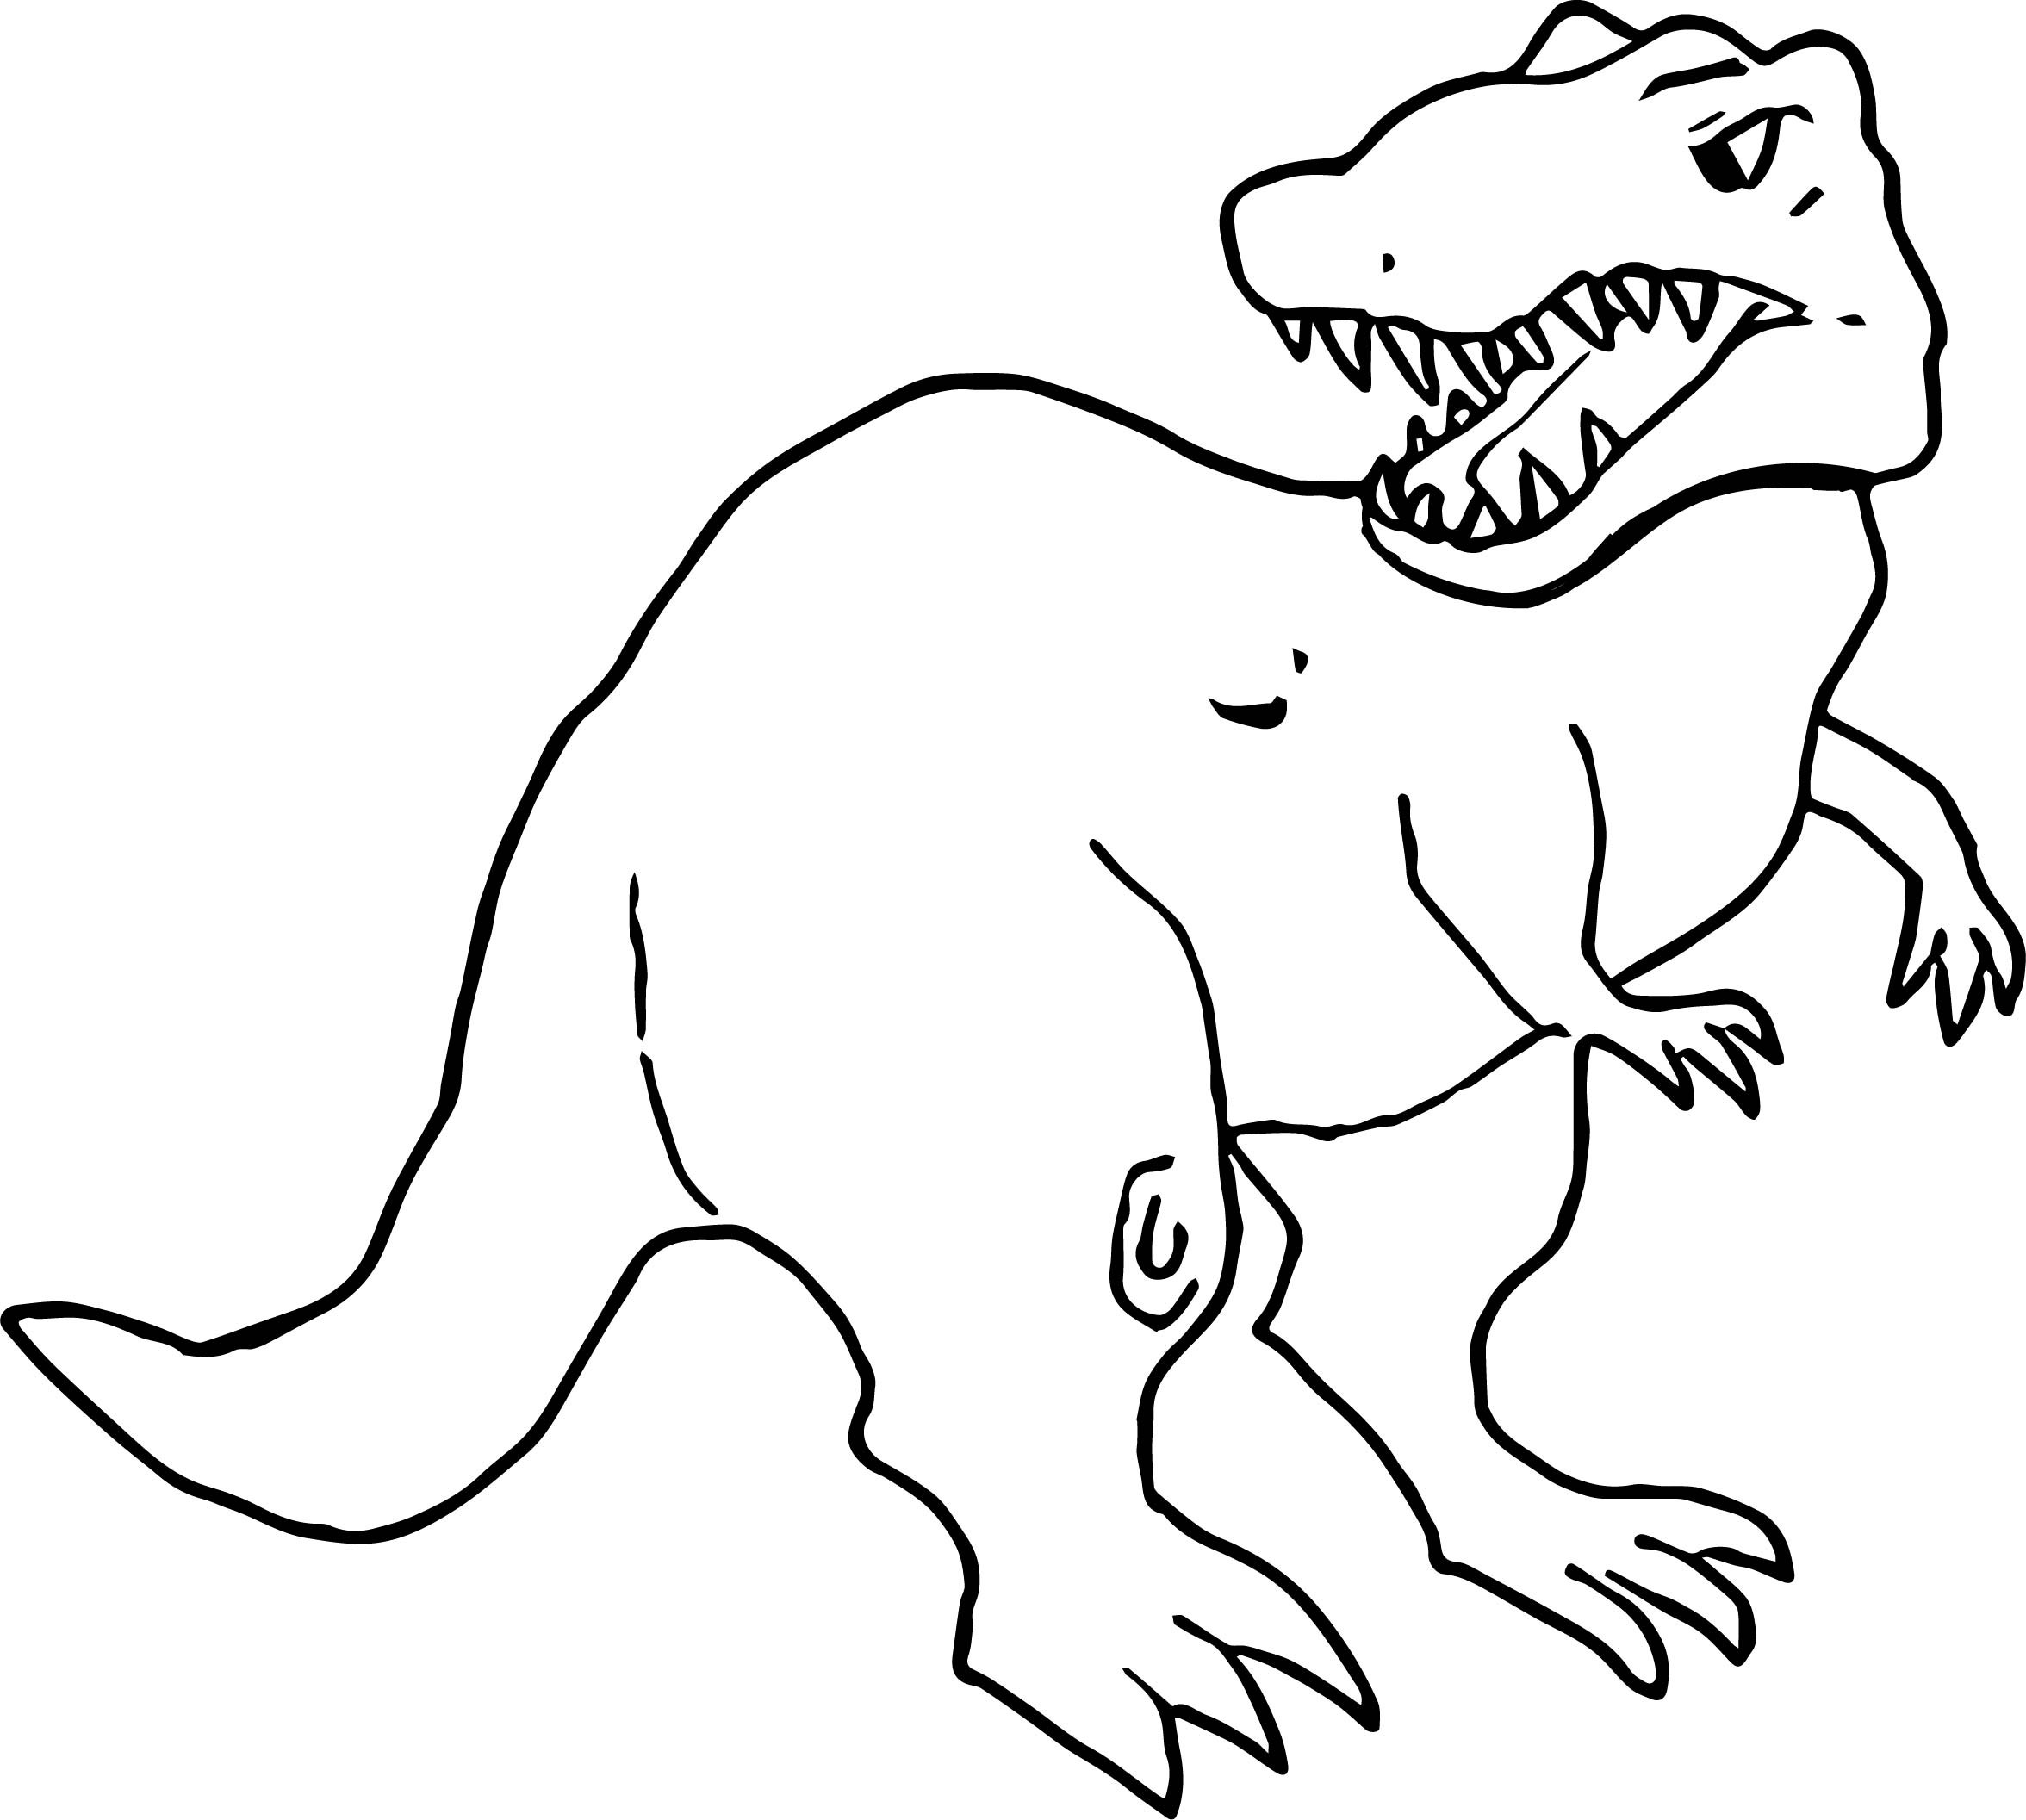 485 Unicorn Easy T Rex Coloring Page with Animal character